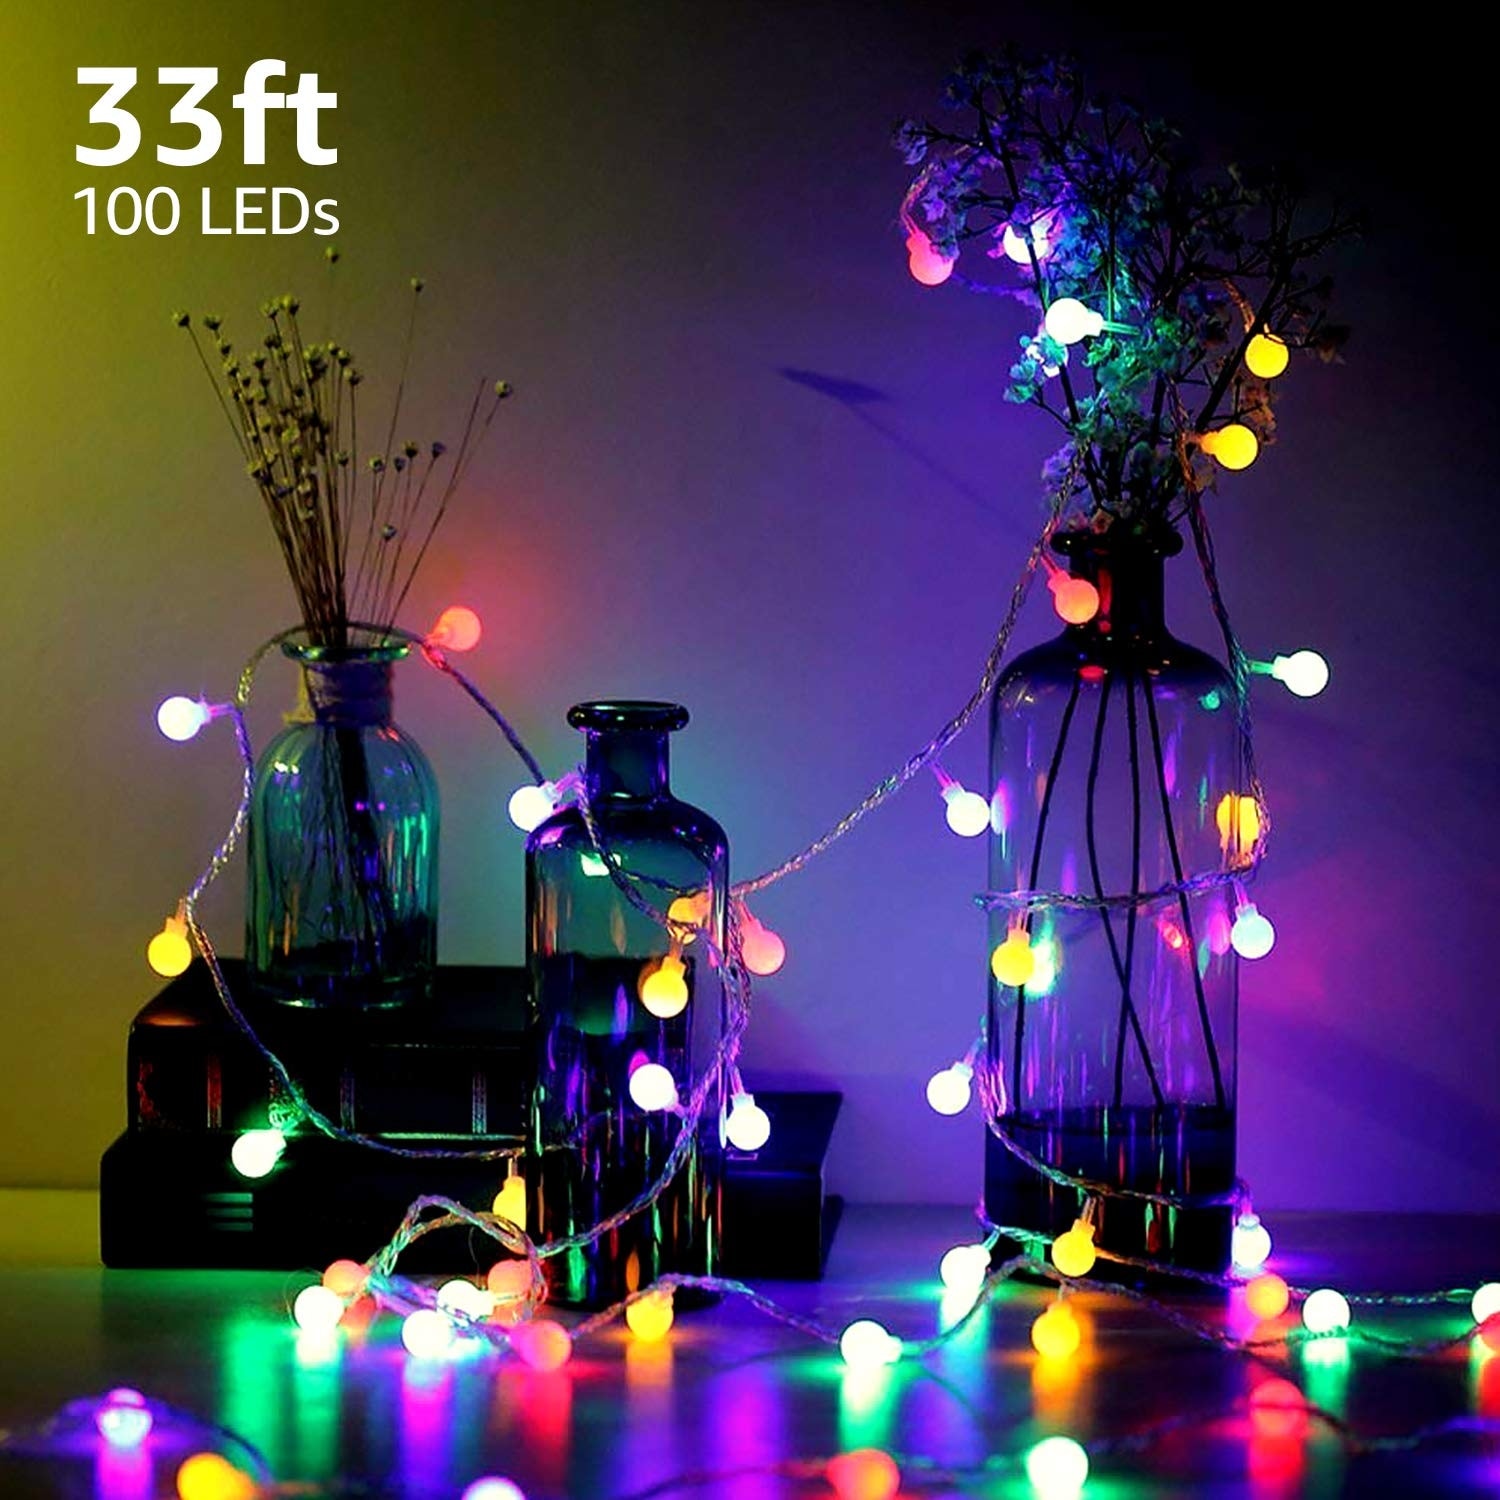 8 Color Modes 4 Lighting Effects Led Rope Light Decor 1 2 20ft Multi Colors Lamps Lighting Ceiling Fans String Fairy Lights